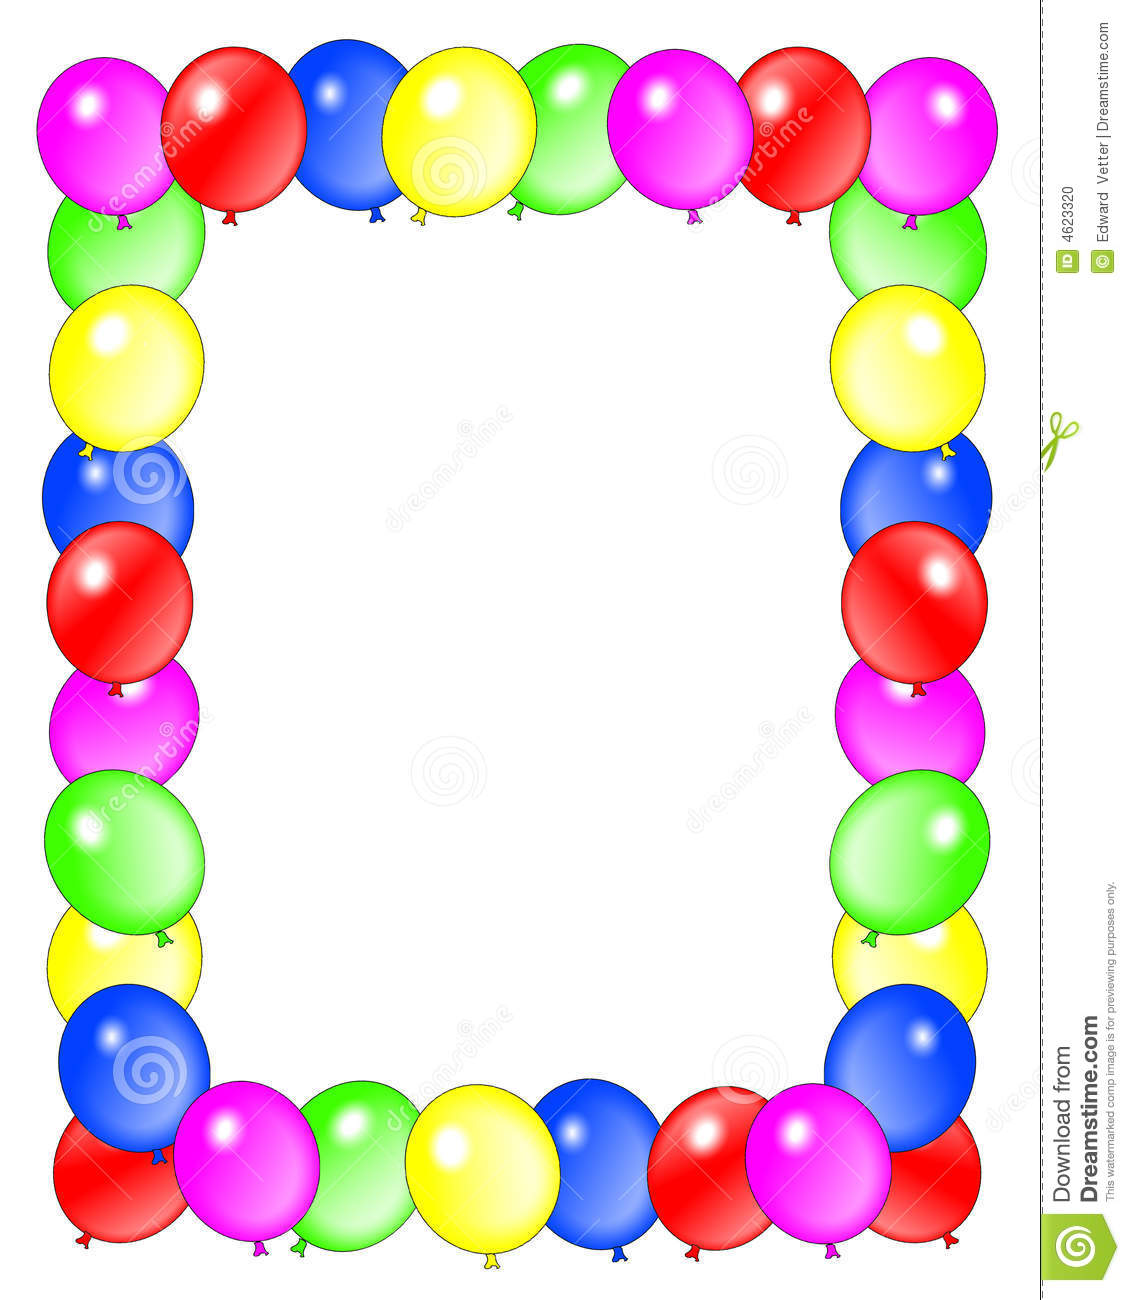 Free Birthday Borders, Download Free Birthday Borders png images, Free